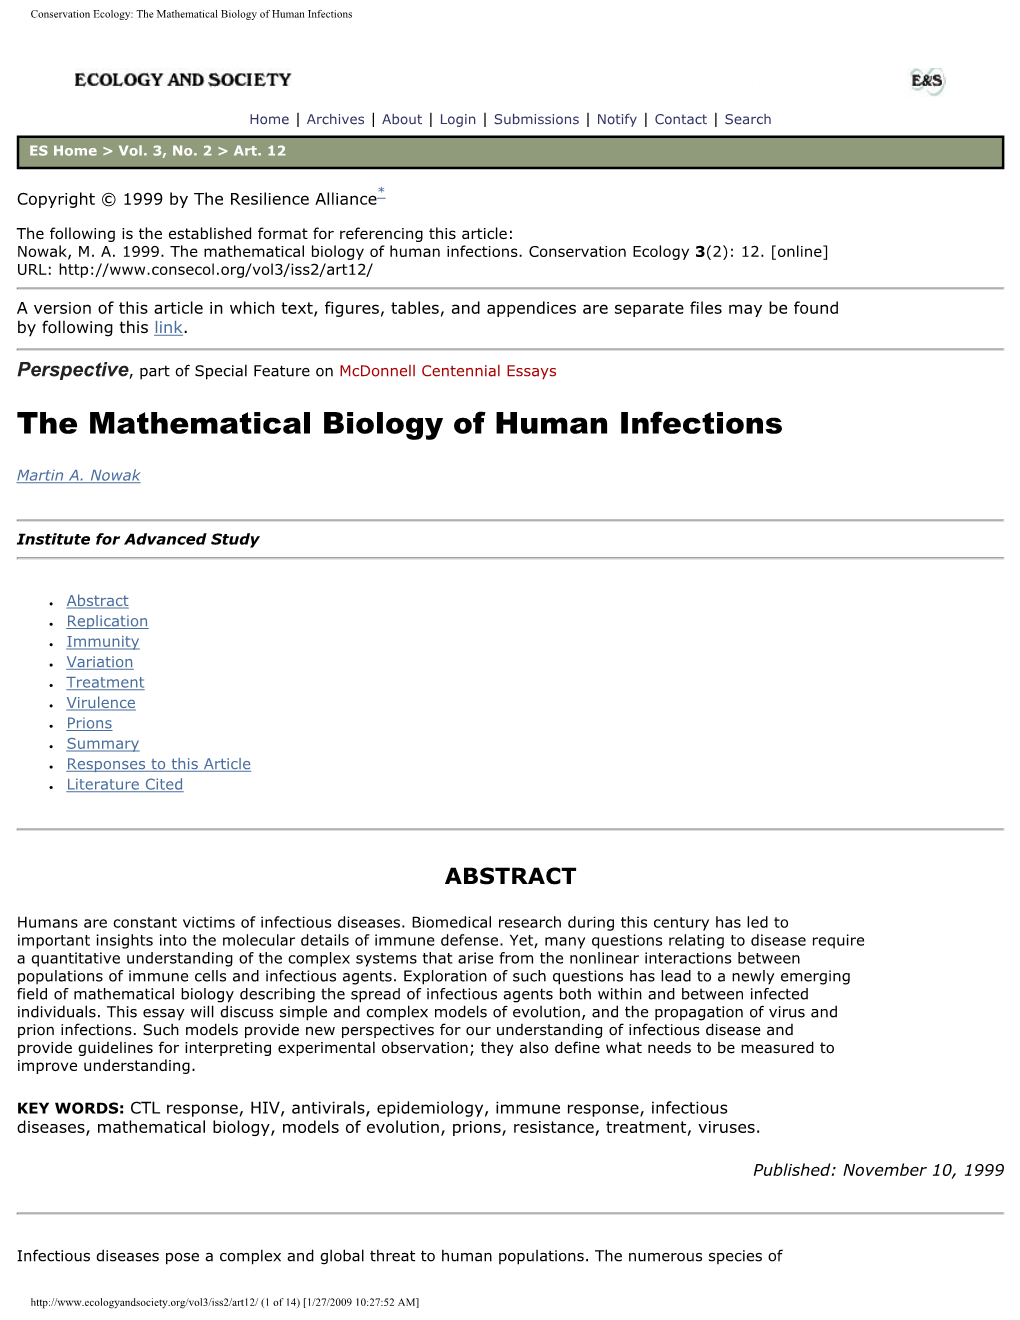 The Mathematical Biology of Human Infections